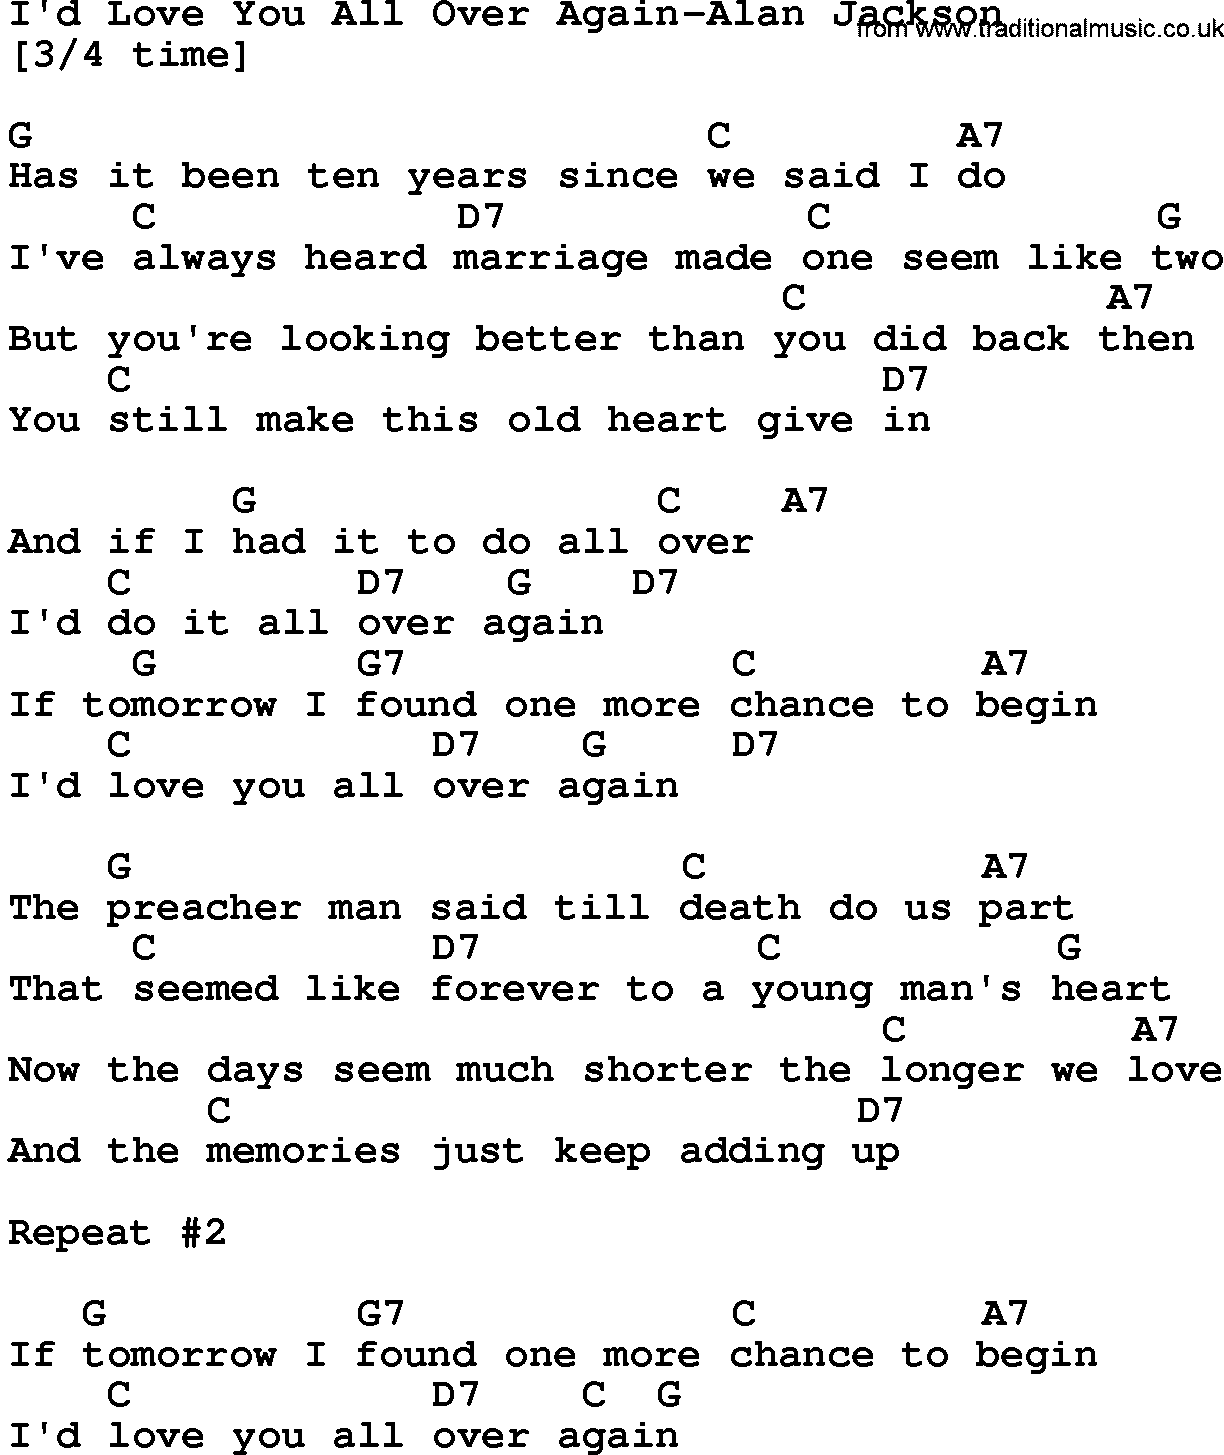 Country music song: I'd Love You All Over Again-Alan Jackson lyrics and chords